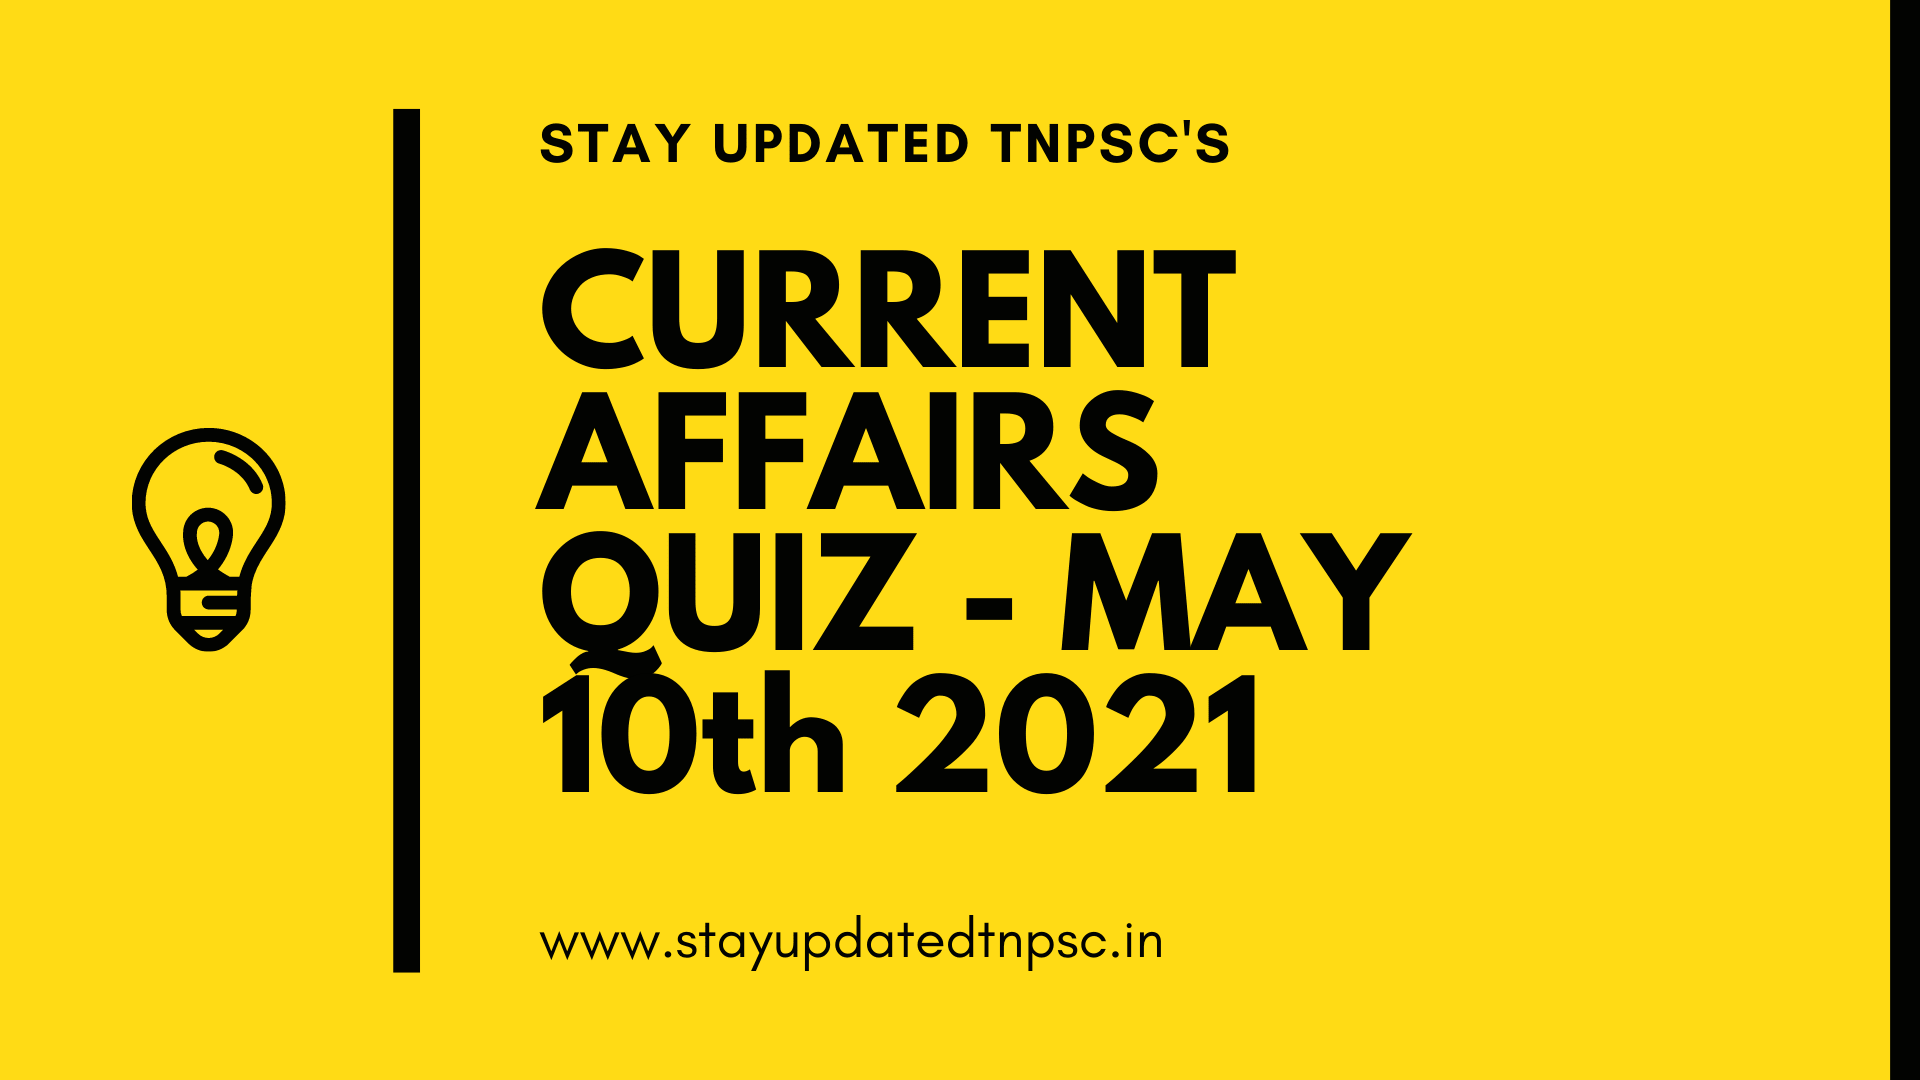 TNPSC DAILY CURRENT AFFAIRS: 10 MAY 2021